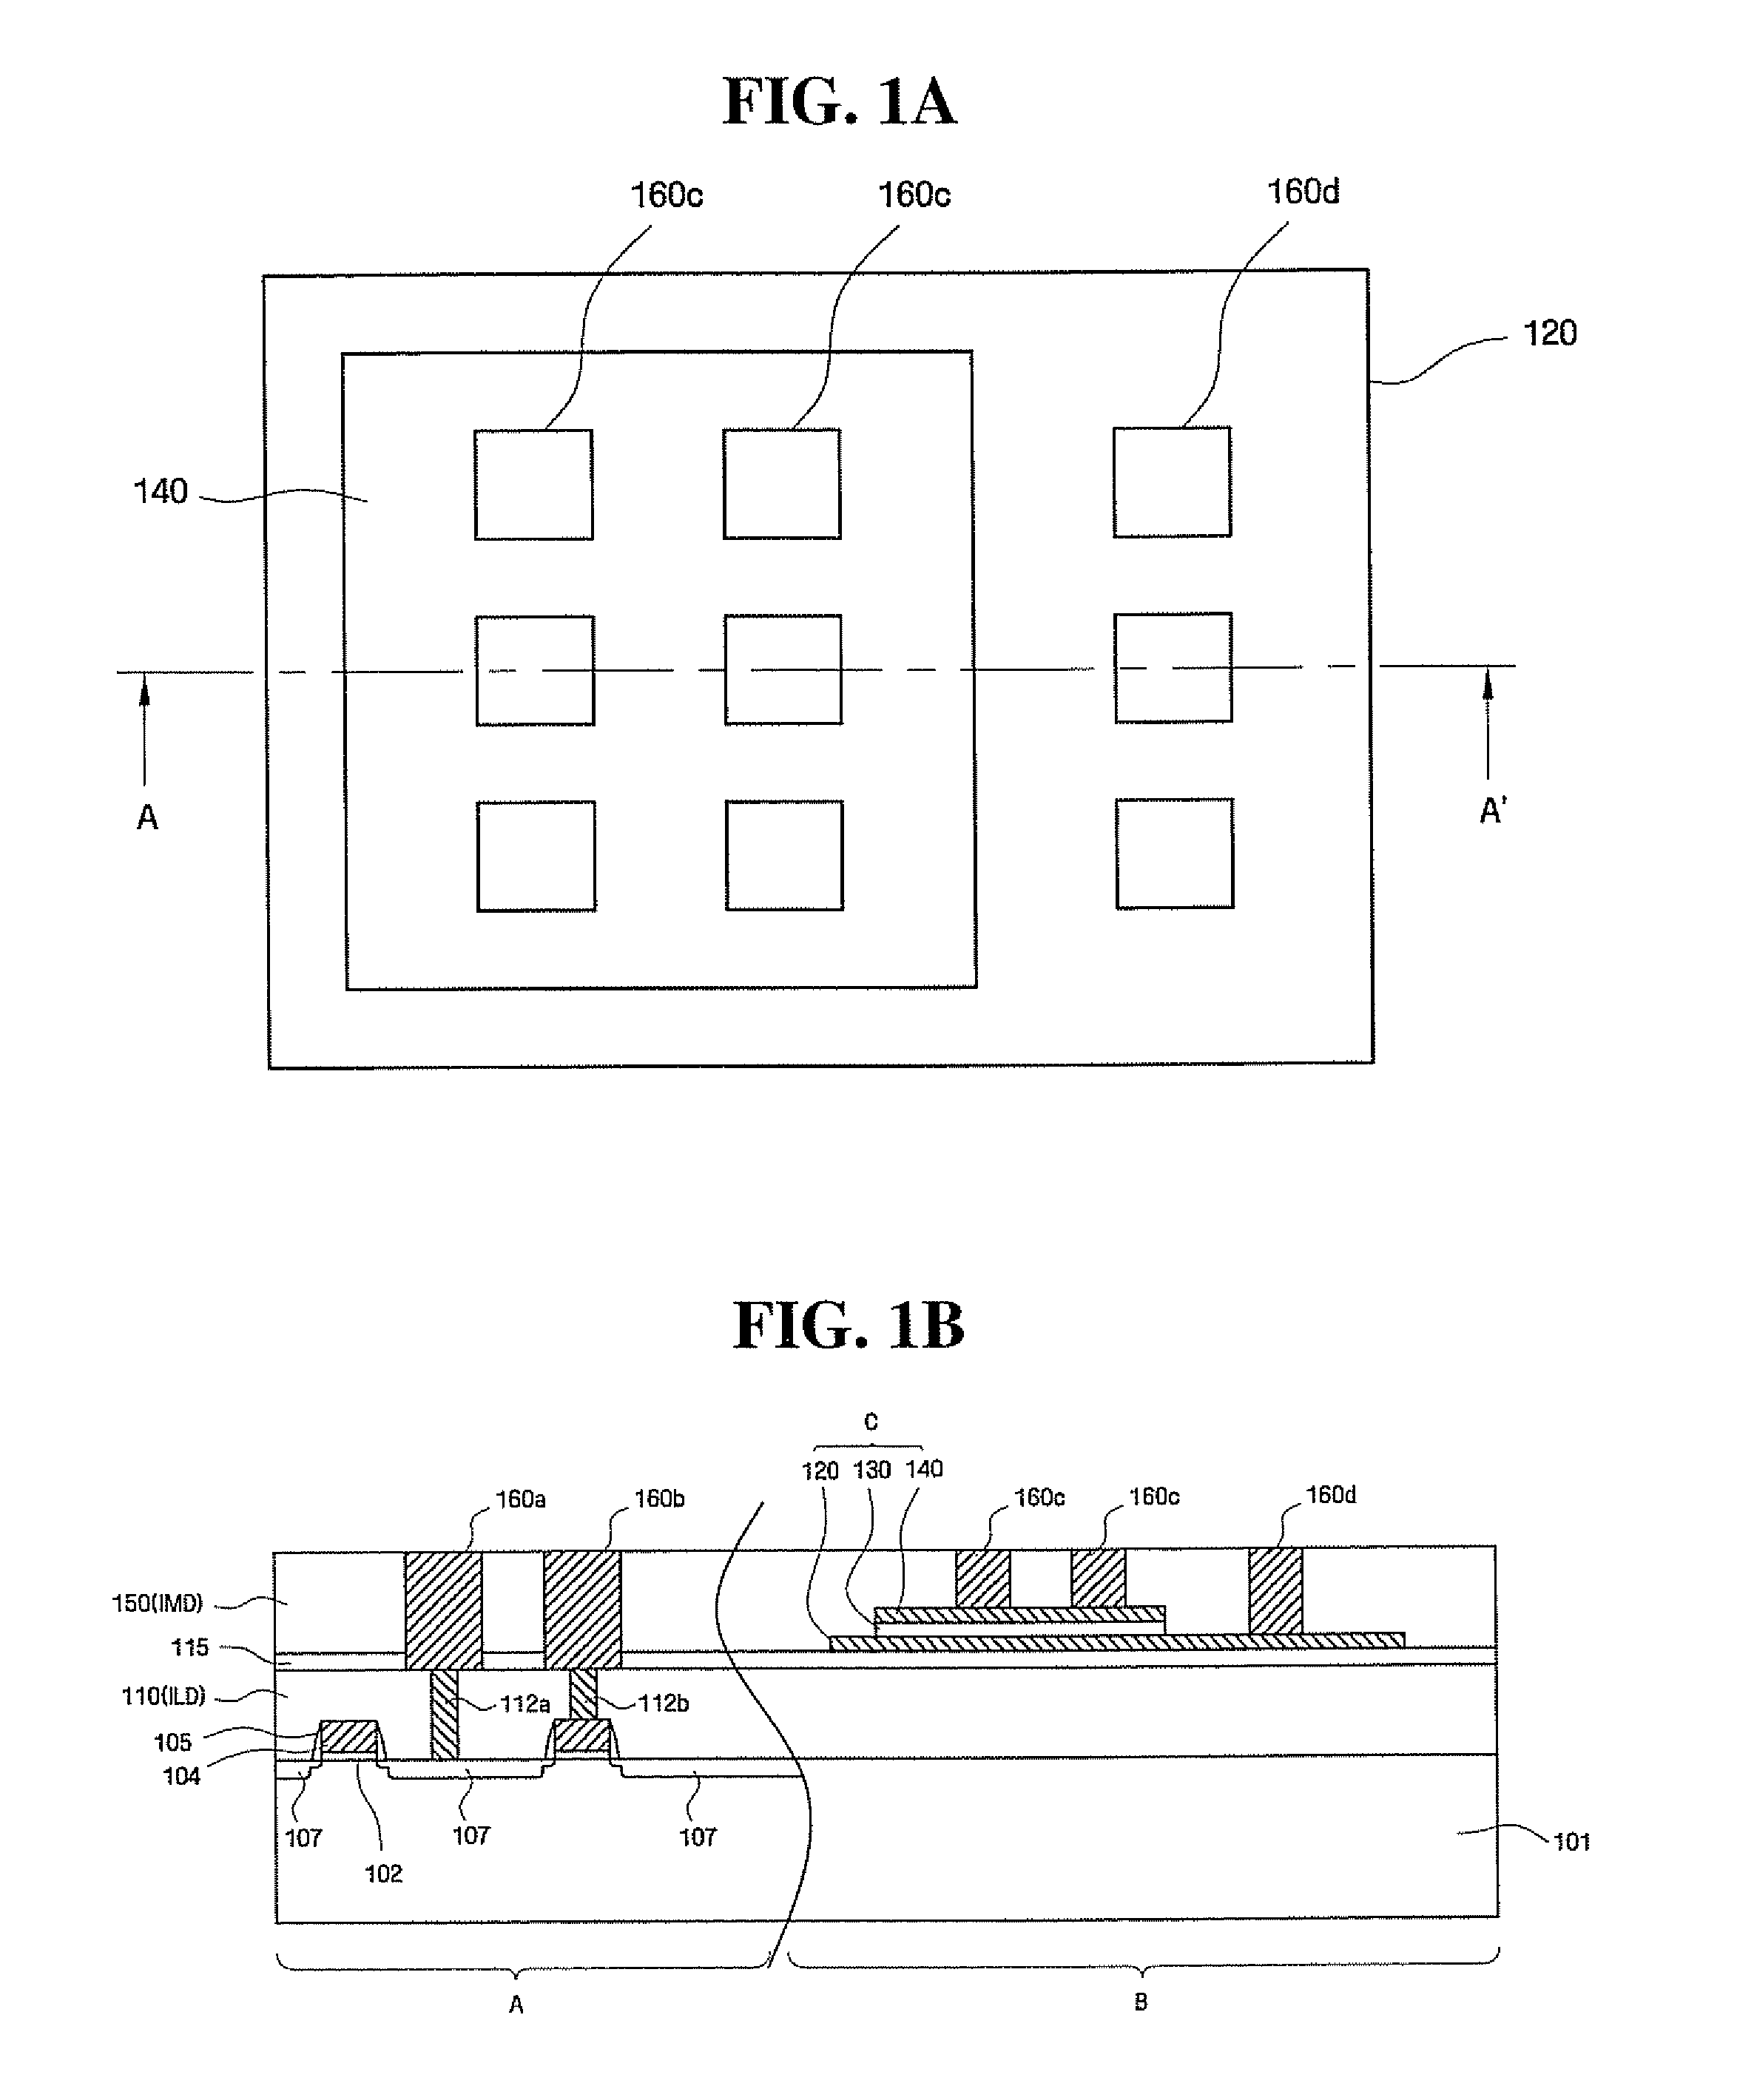 Metal-Insulator-Metal (MIM) Capacitors Formed Beneath First Level Metallization and Methods of Forming Same